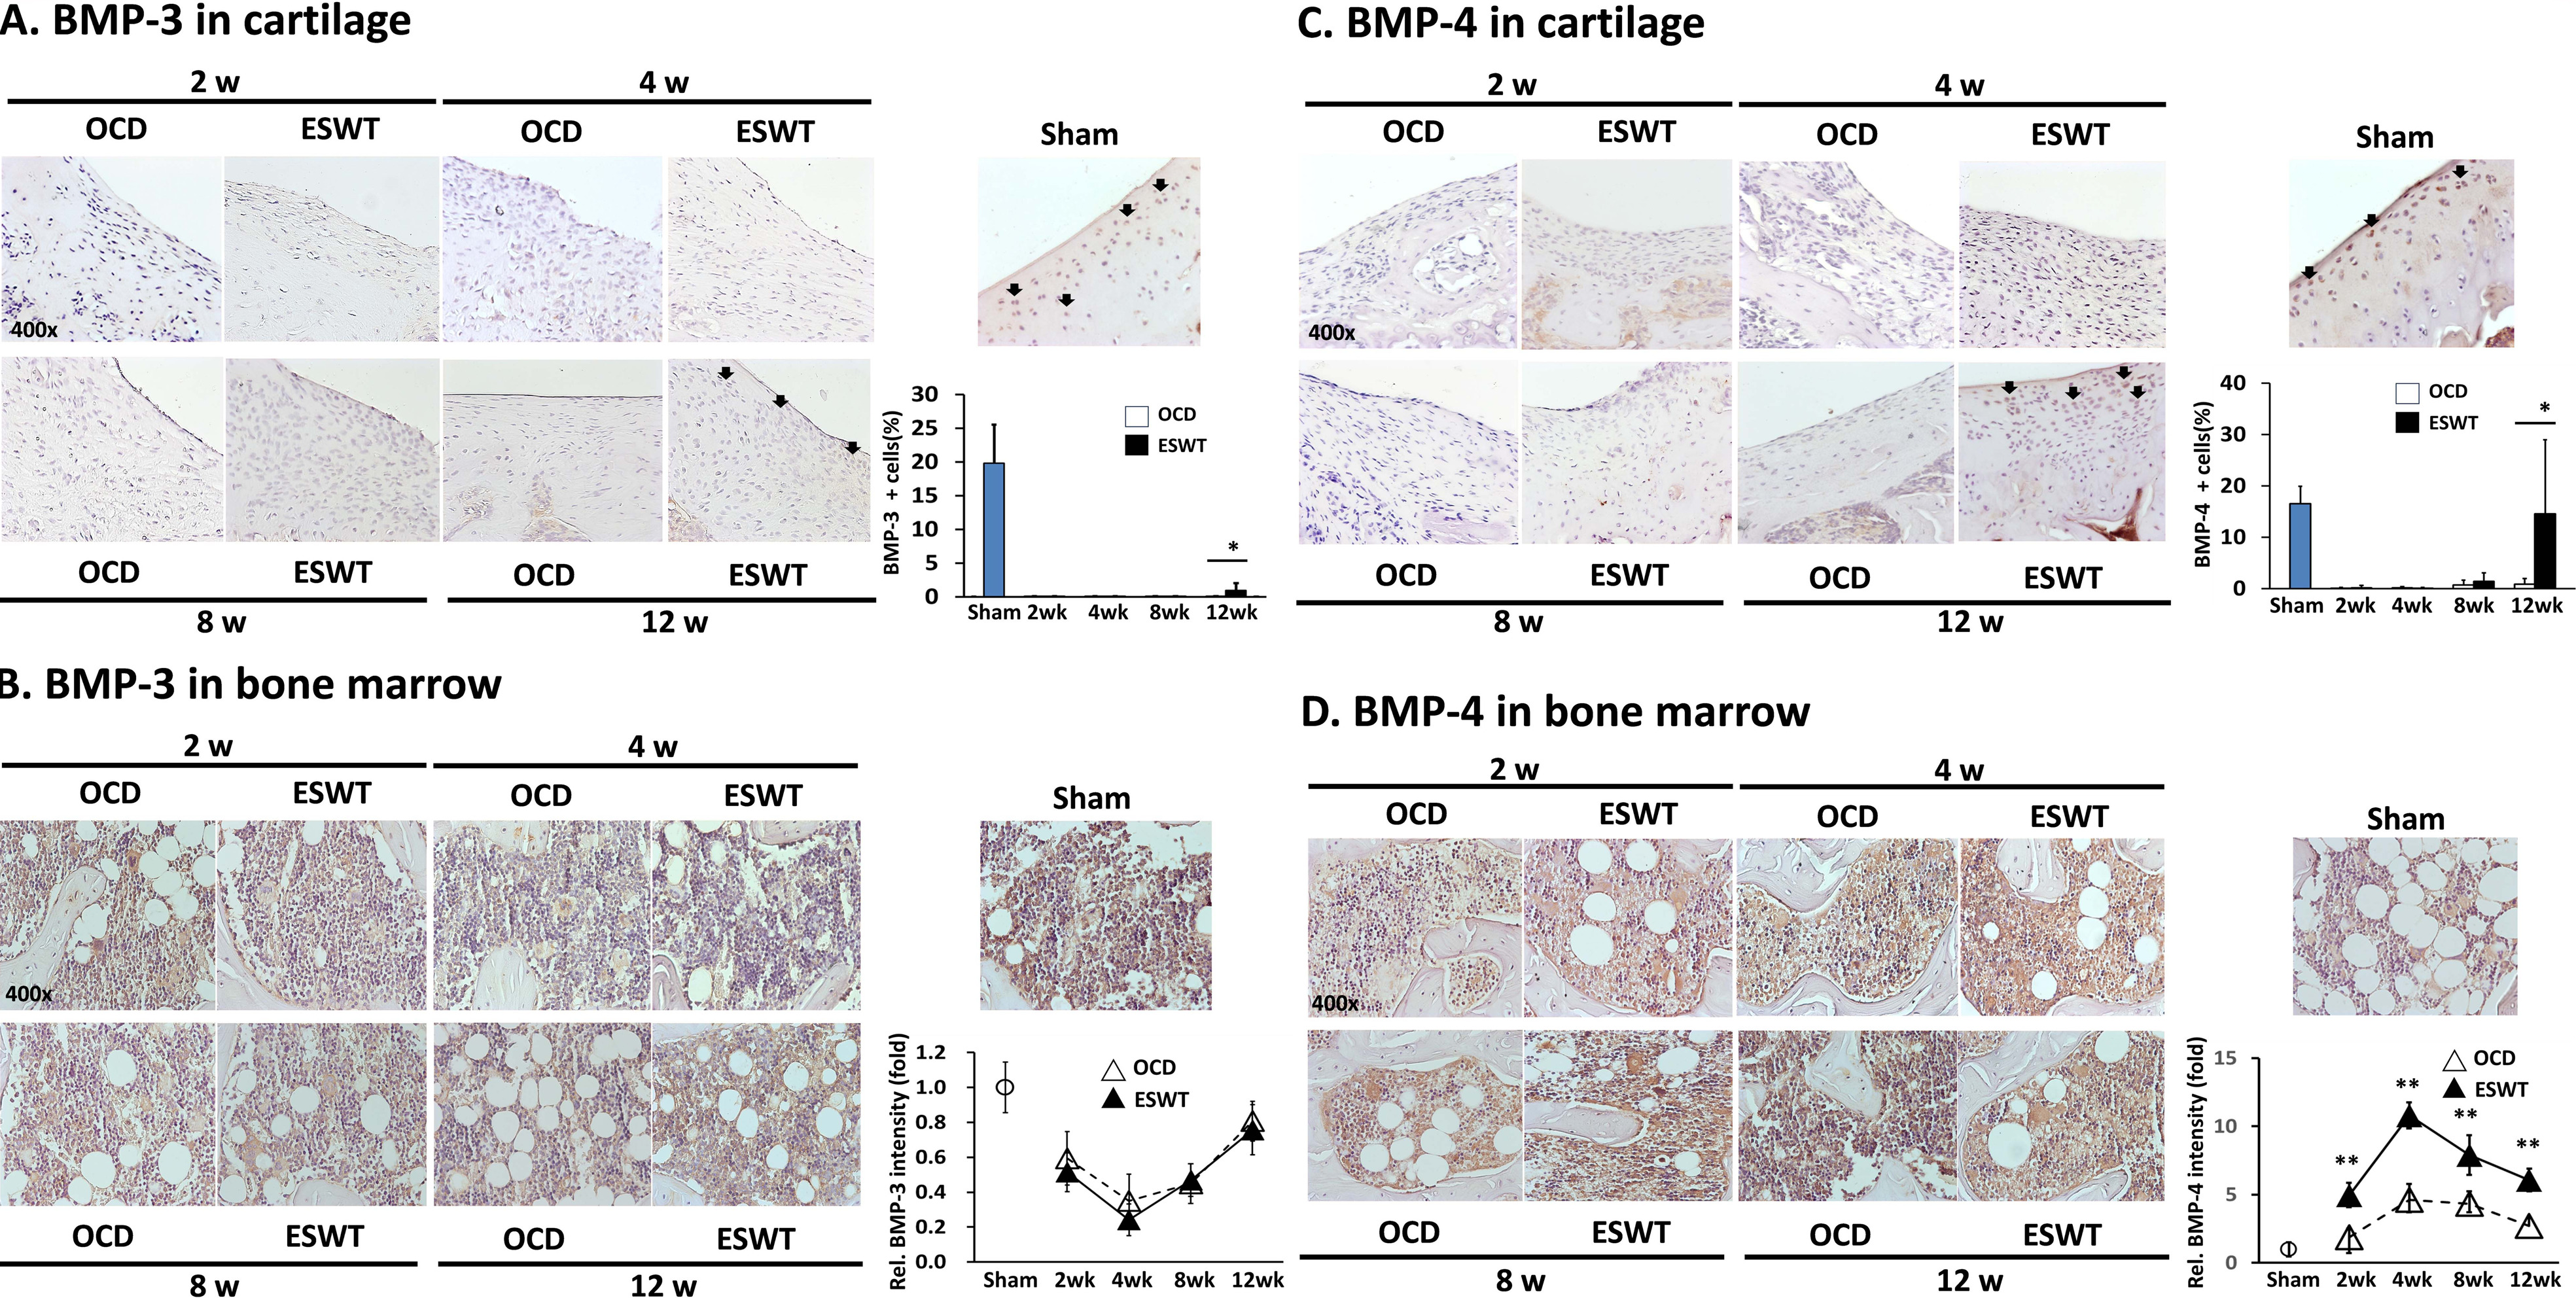 Fig. 5 
            The investigation shows the expression profiles of bone morphogenetic protein (BMP)-3 and BMP-4 in the cartilage and bone marrow of Sham, osteochondral defect (OCD), and extracorporeal shockwave therapy (ESWT) groups across various time intervals. Histological section images are presented to illustrate a) BMP-3 in the cartilage, b) BMP-3 in the bone marrow, c) BMP-4 in the cartilage, and d) BMP-4 in the bone marrow. All images are acquired at a magnification of 400×. Additionally, the quantification of immunohistochemistry stains involves determining the percentage of positive cells at the defect sites and assessing the intensity of bone marrow cells around the subchondral bone regions in the respective panels. *p < 0.05 and **p < 0.01, compared between the OCD and ESWT groups (two-tailed paired t-test).
          